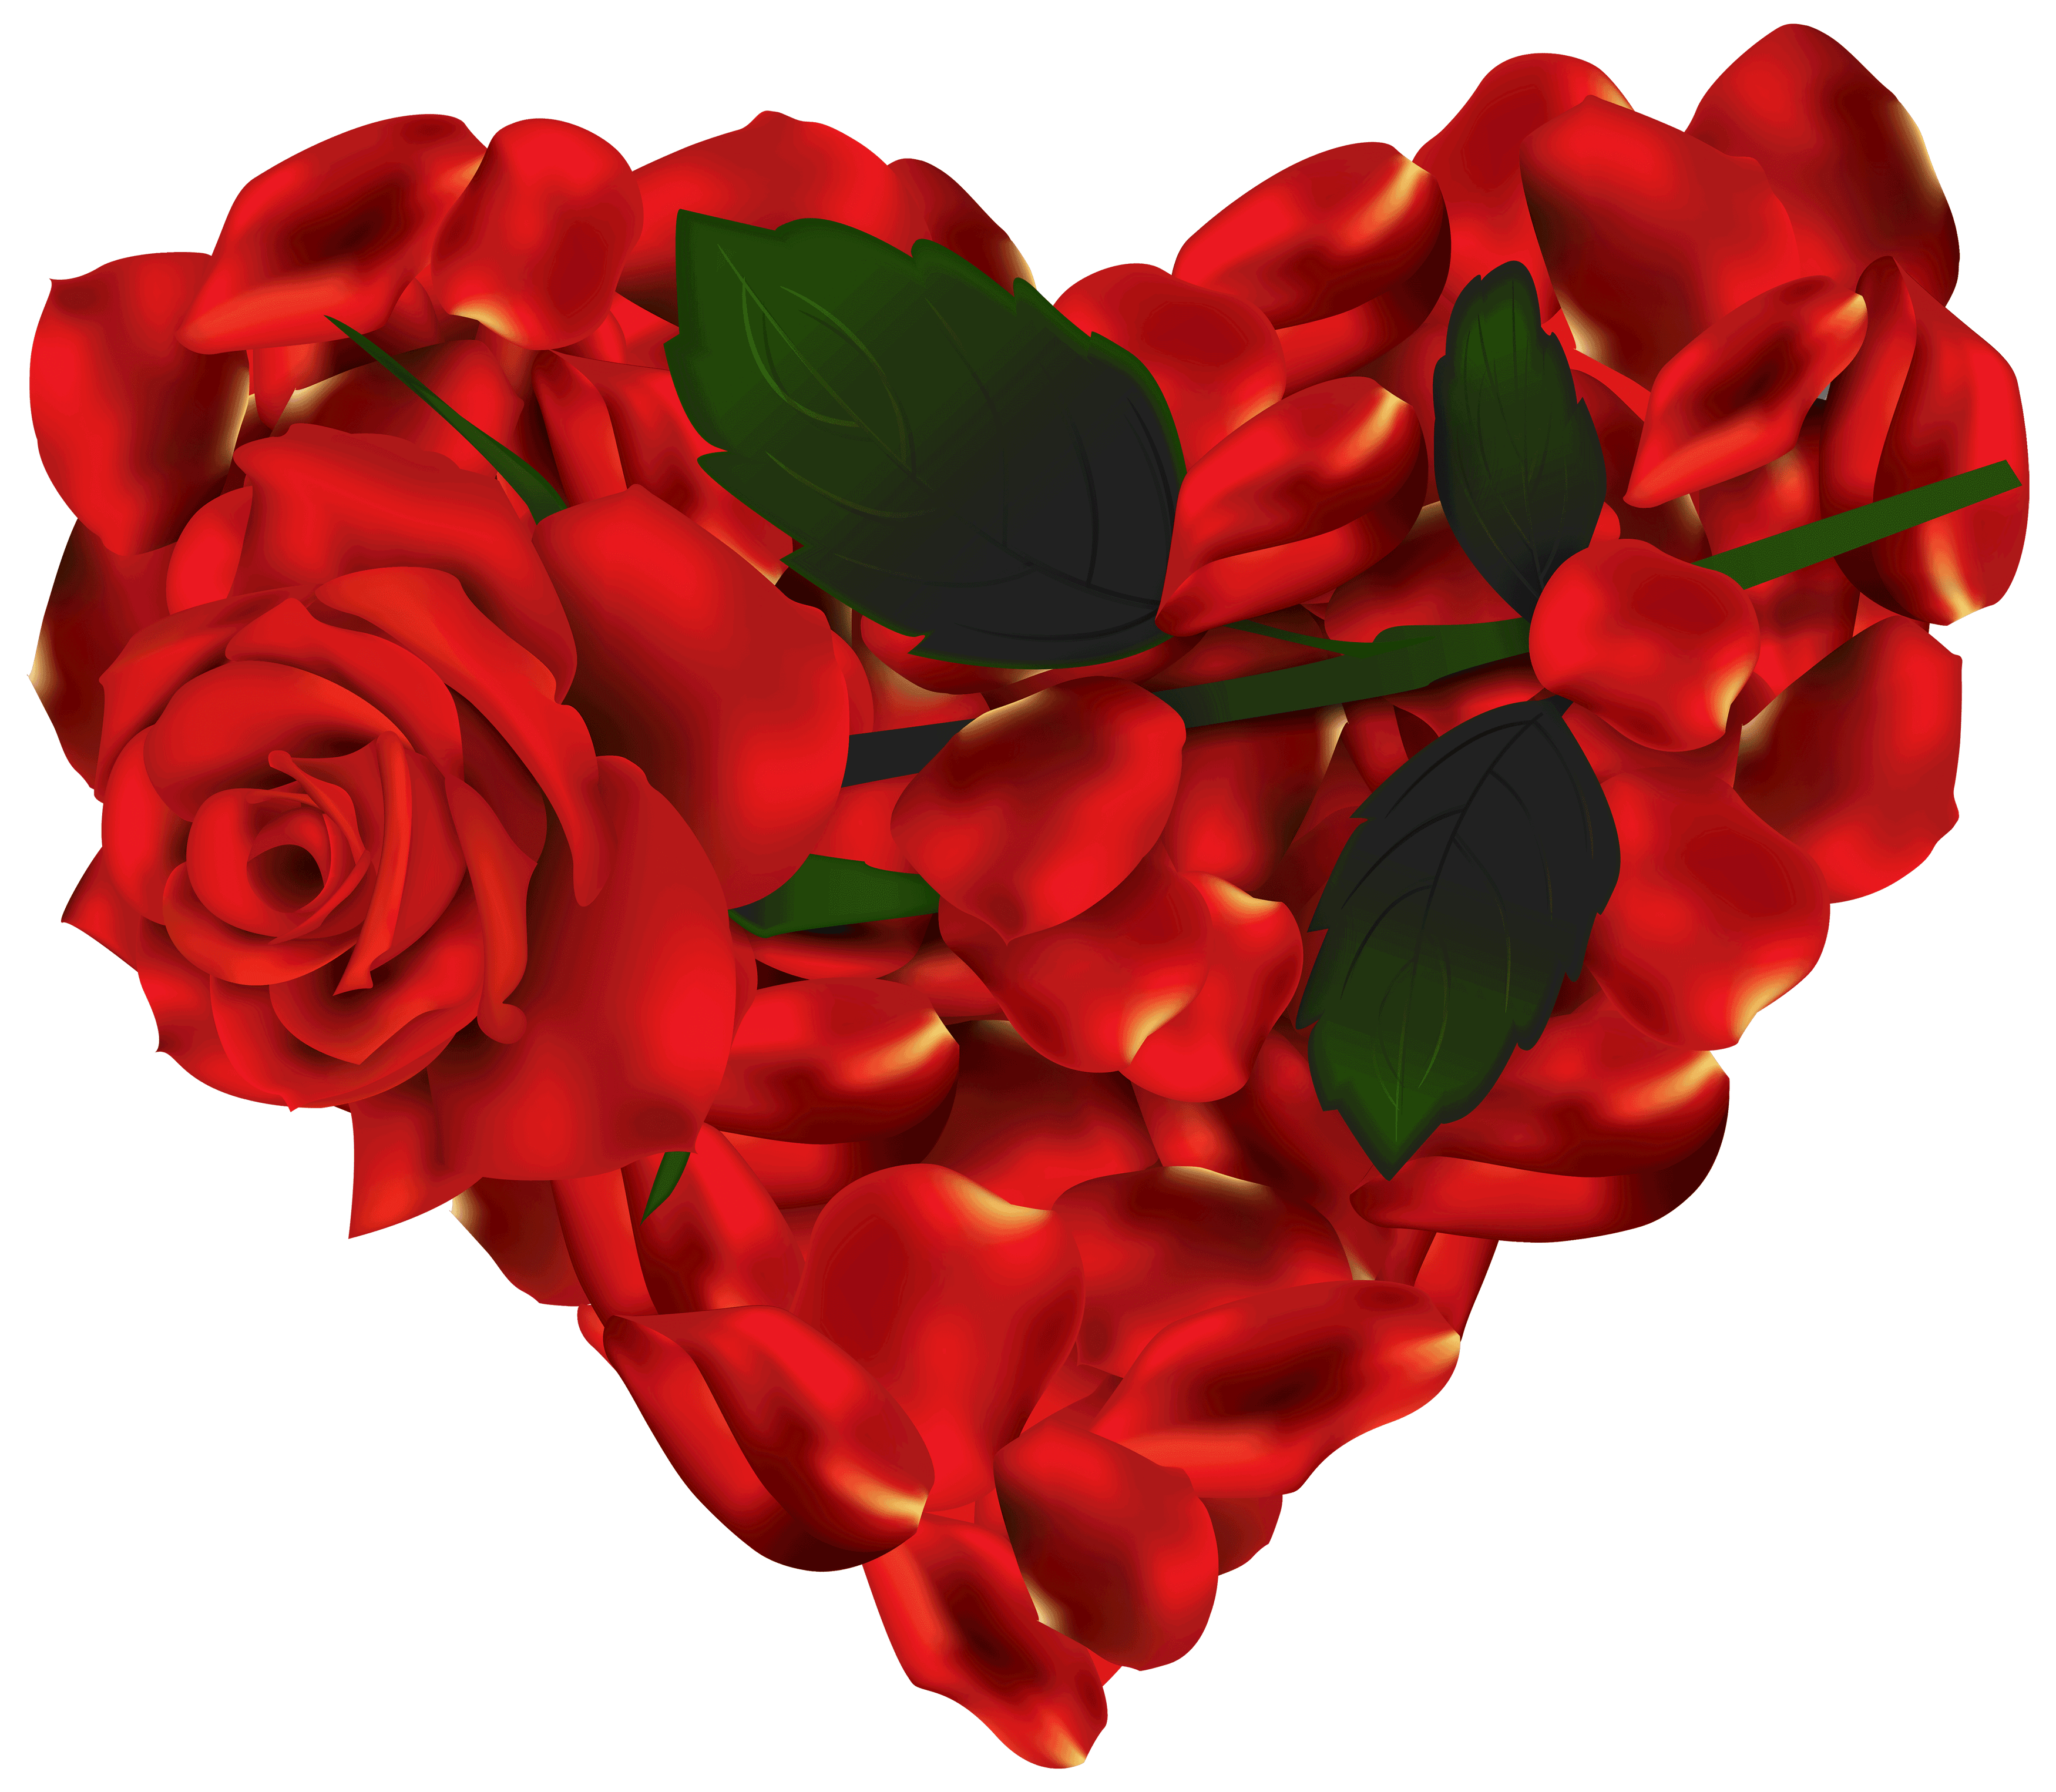 Heart of Roses PNG clipart